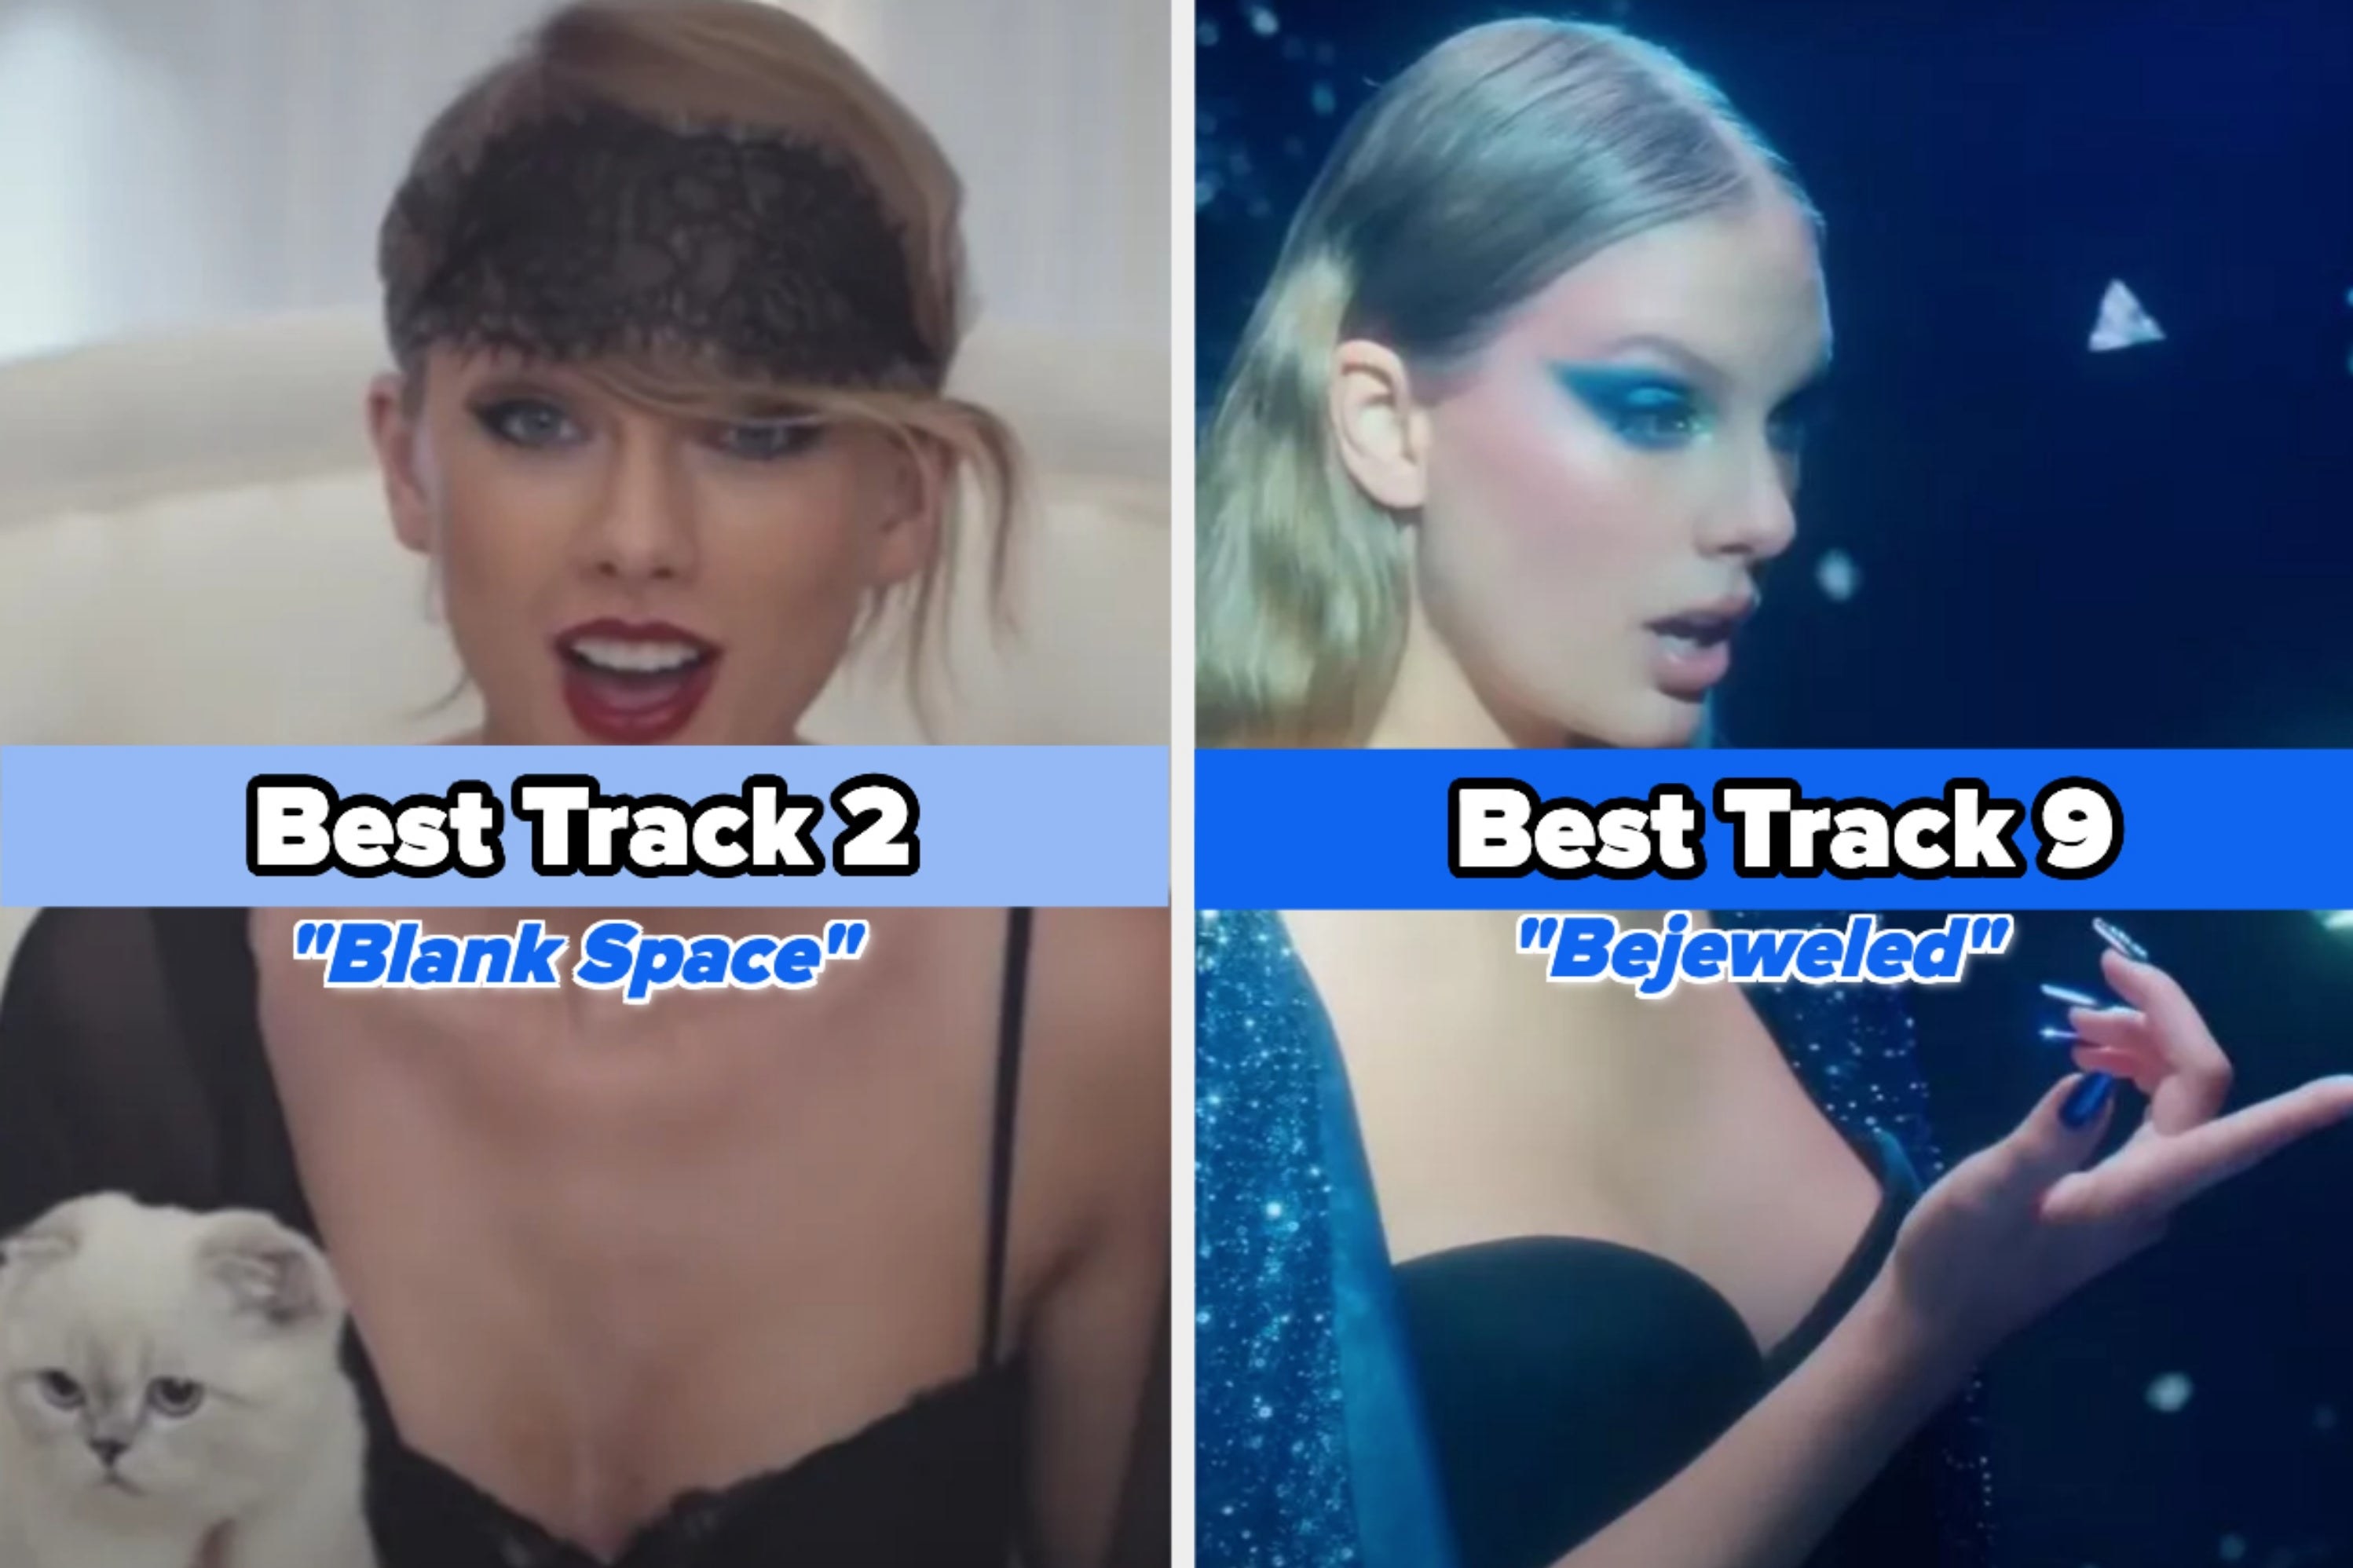 &quot;Best Track 2: &#x27;Blank Space&#x27;; Best Track 9: &#x27;Bejeweled&#x27;&quot;